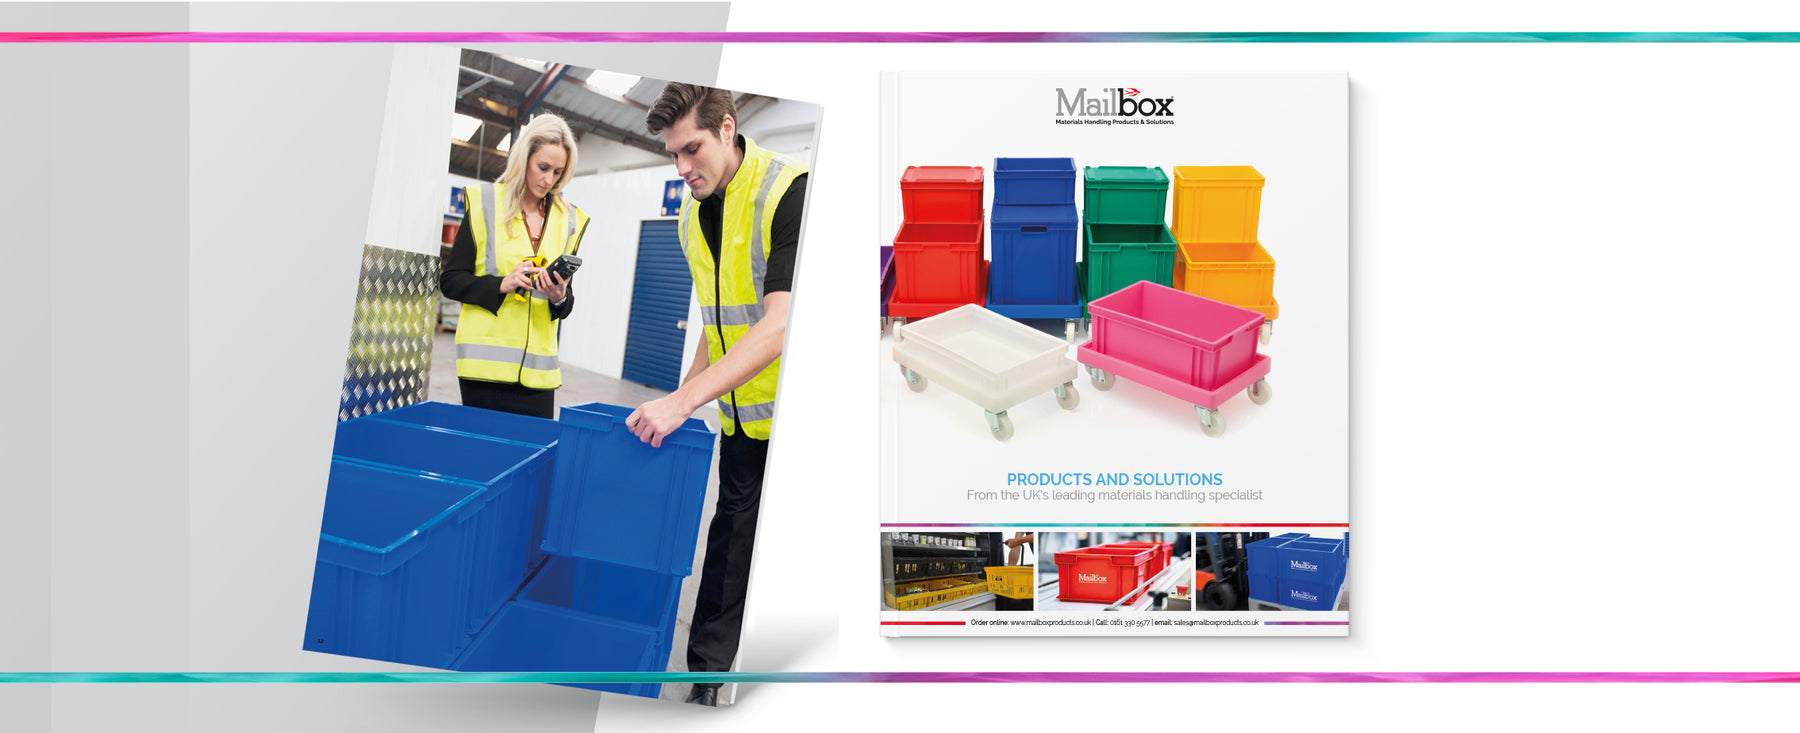 PRODUCTS AND SOLUTIONS From the UK’s leading materials handling specialist